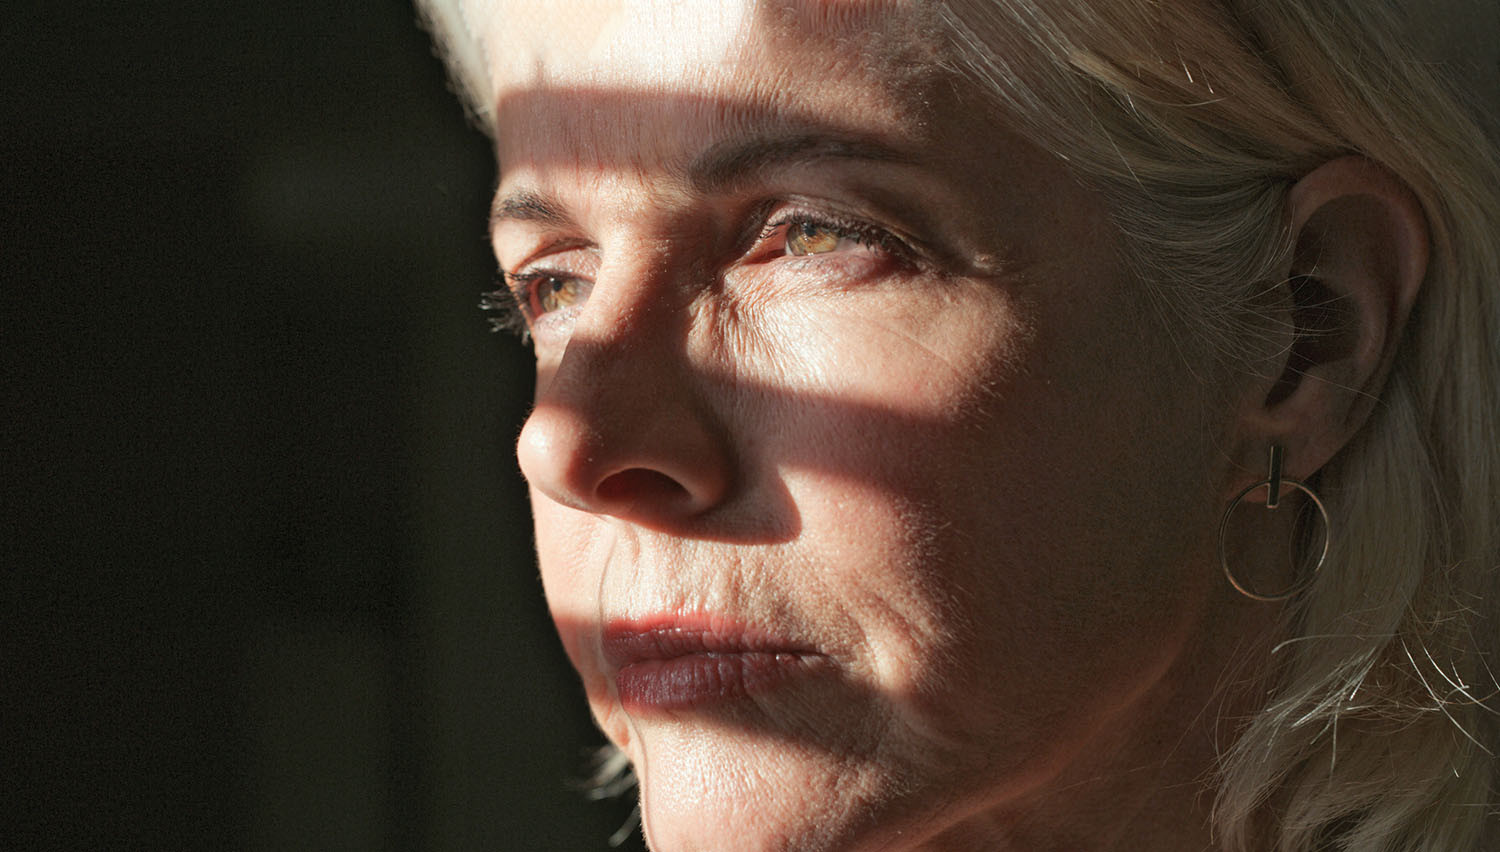 close-up photo of the face of a somber woman, light and shadow from a nearby window are shown across her face